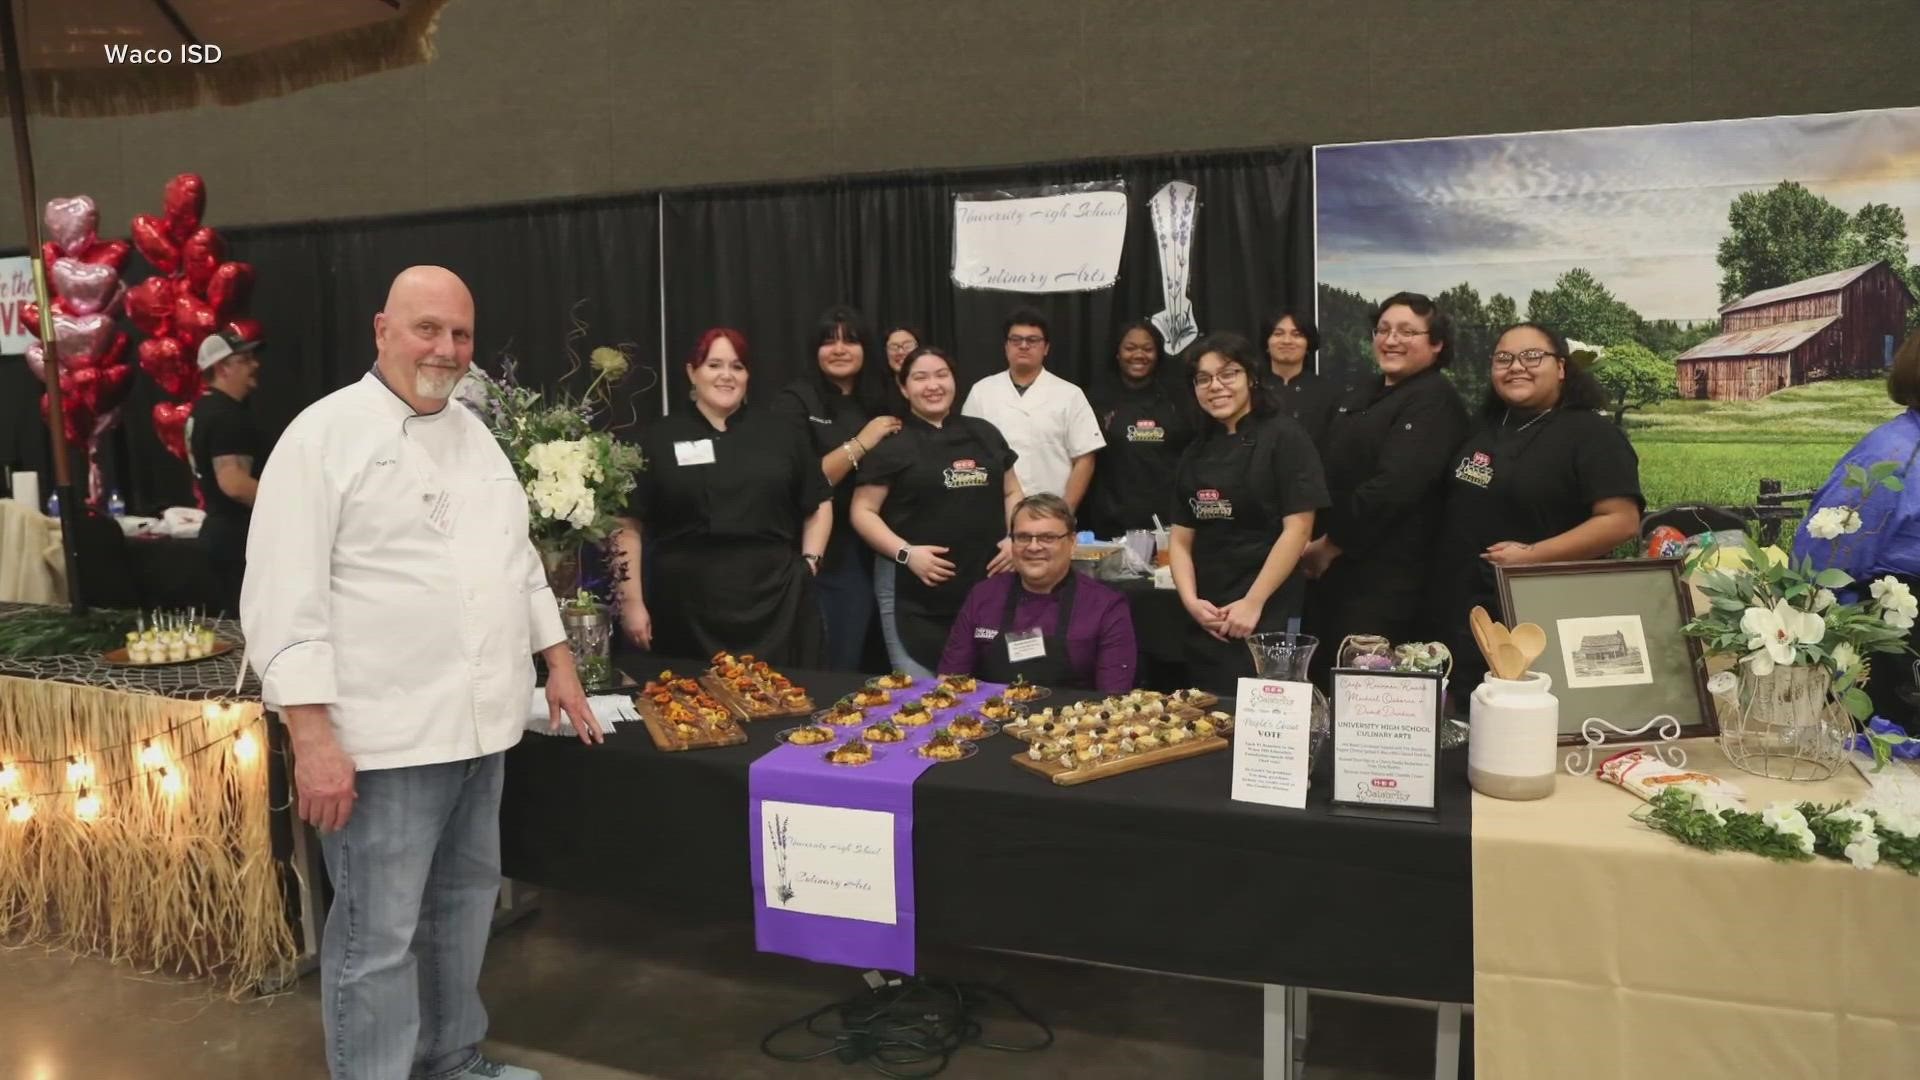 This year's cookoff raised more money than ever before.